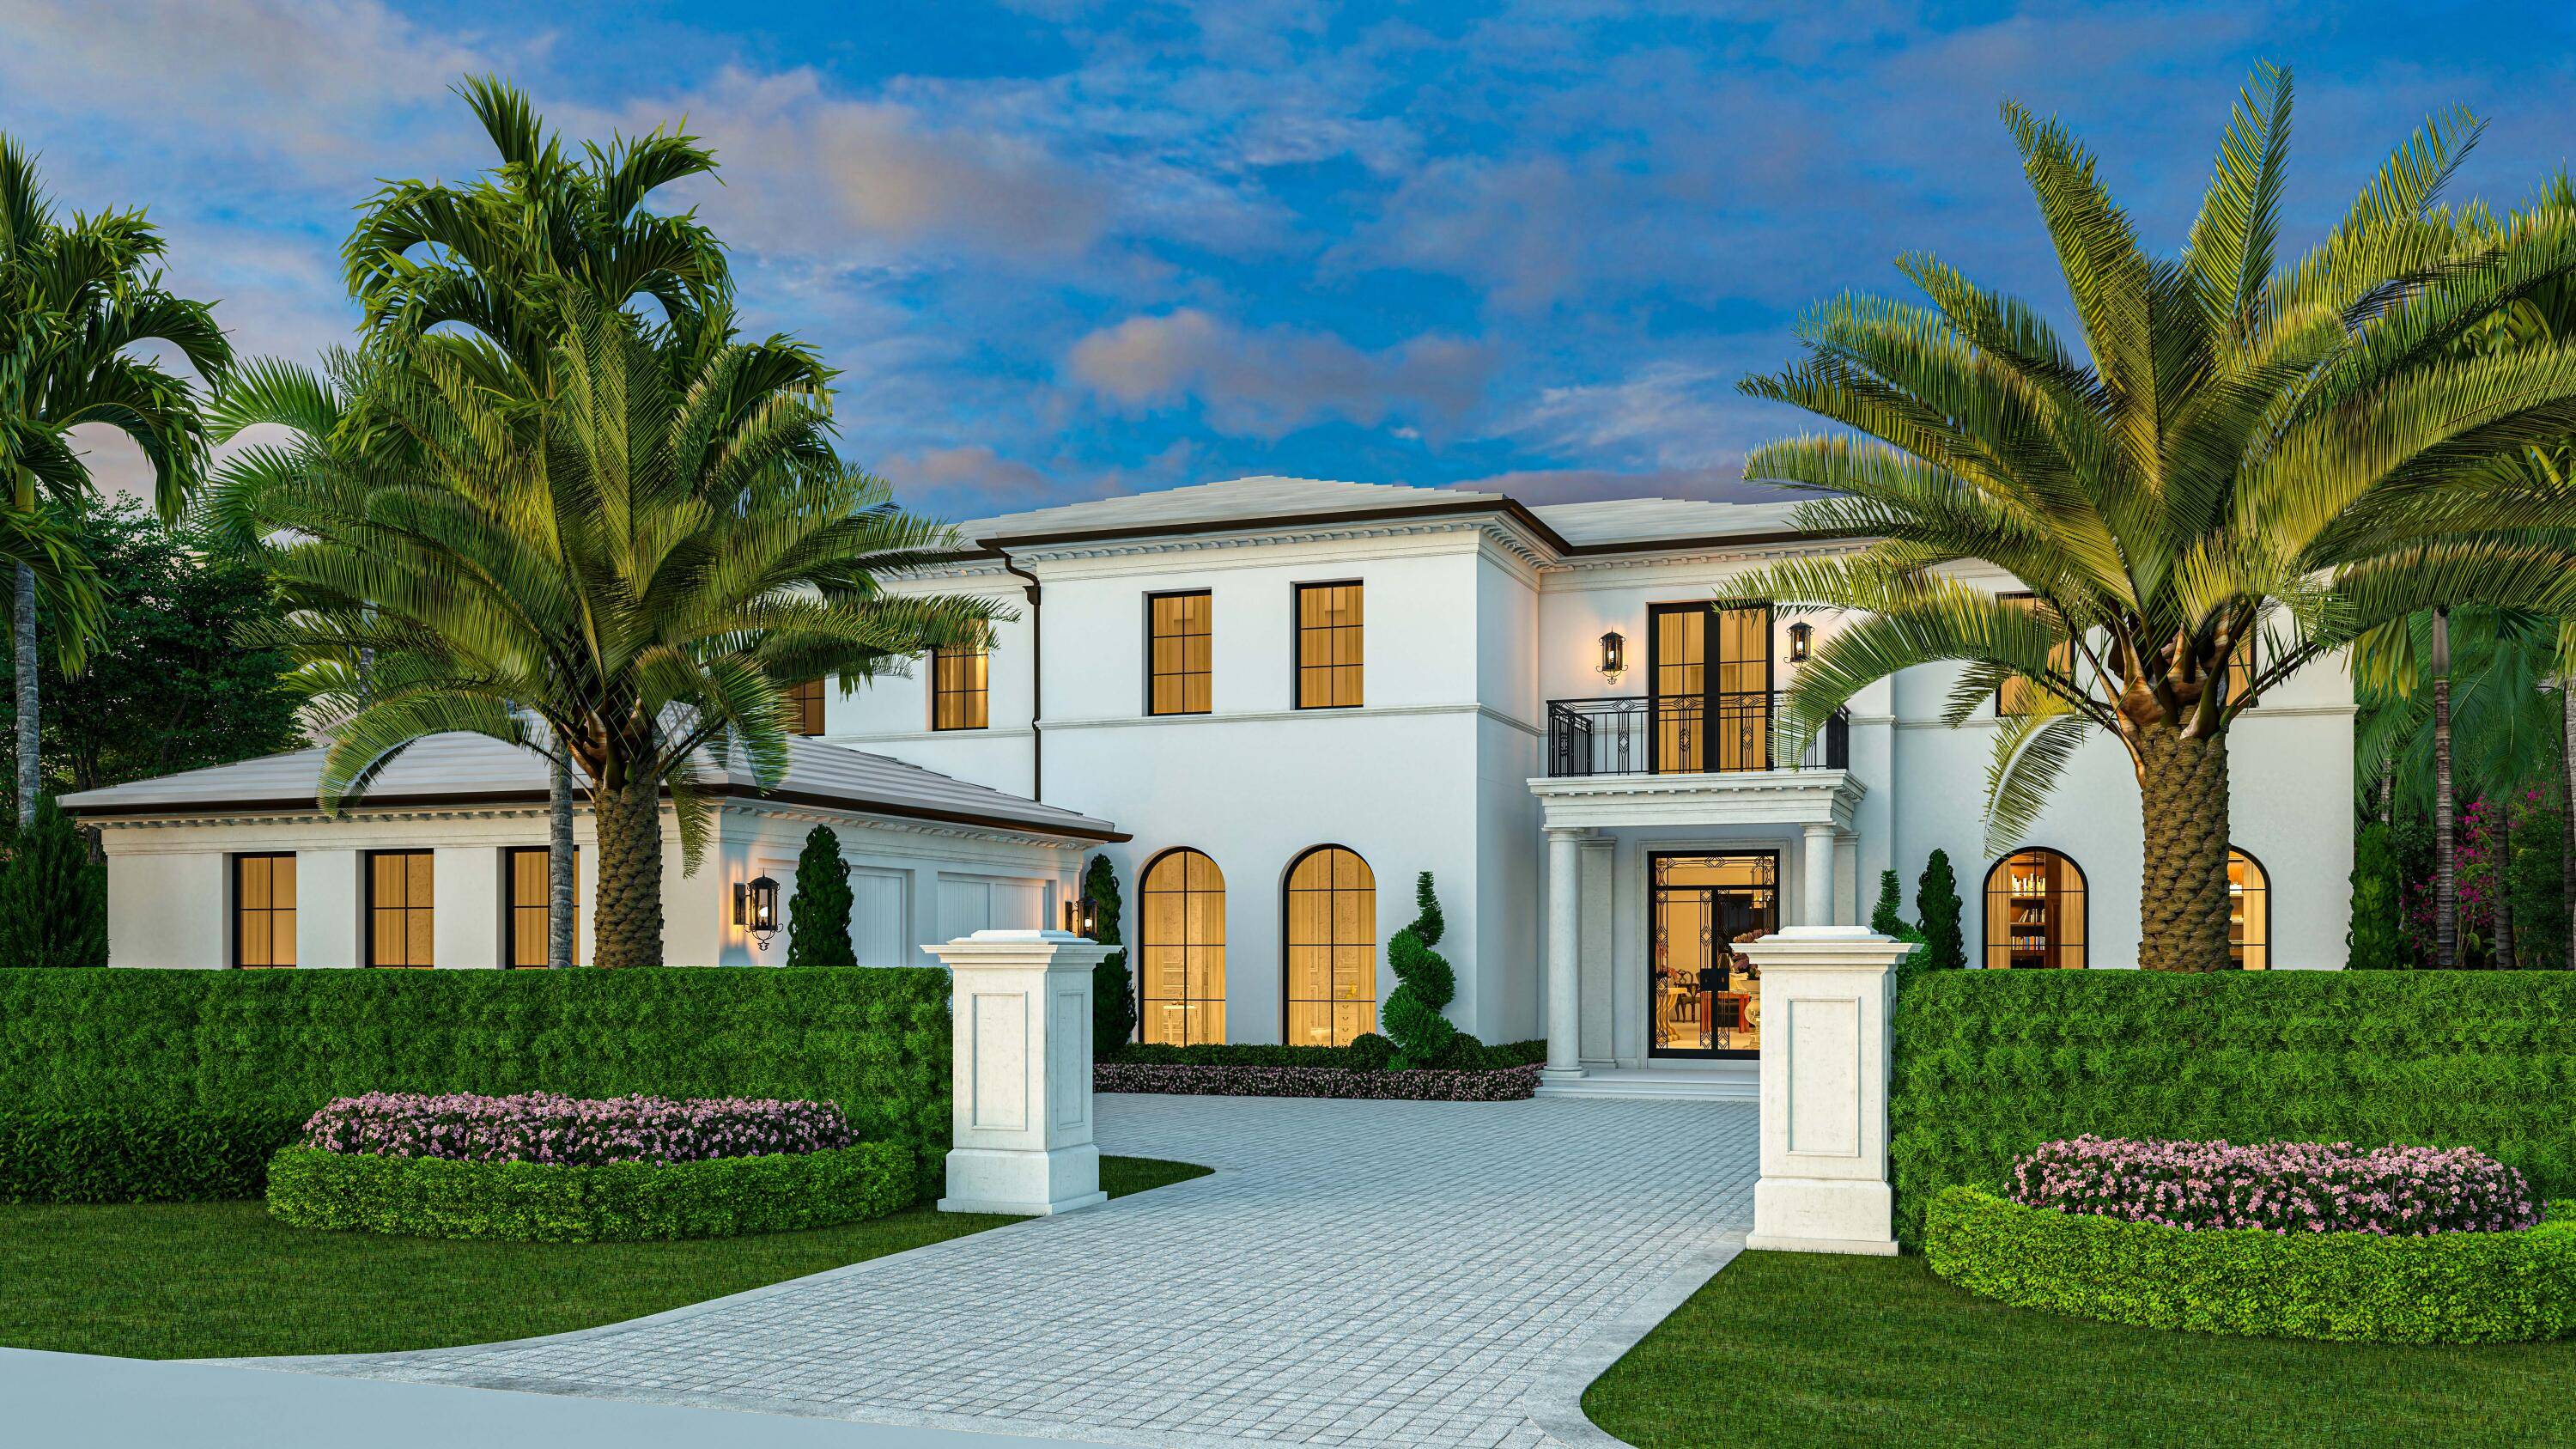 Classic Palm Beach architecture that recalls sophisticated Island Bermuda styling, this 9, 100 TSF new construction estate is prime for an owner's discerning customization.